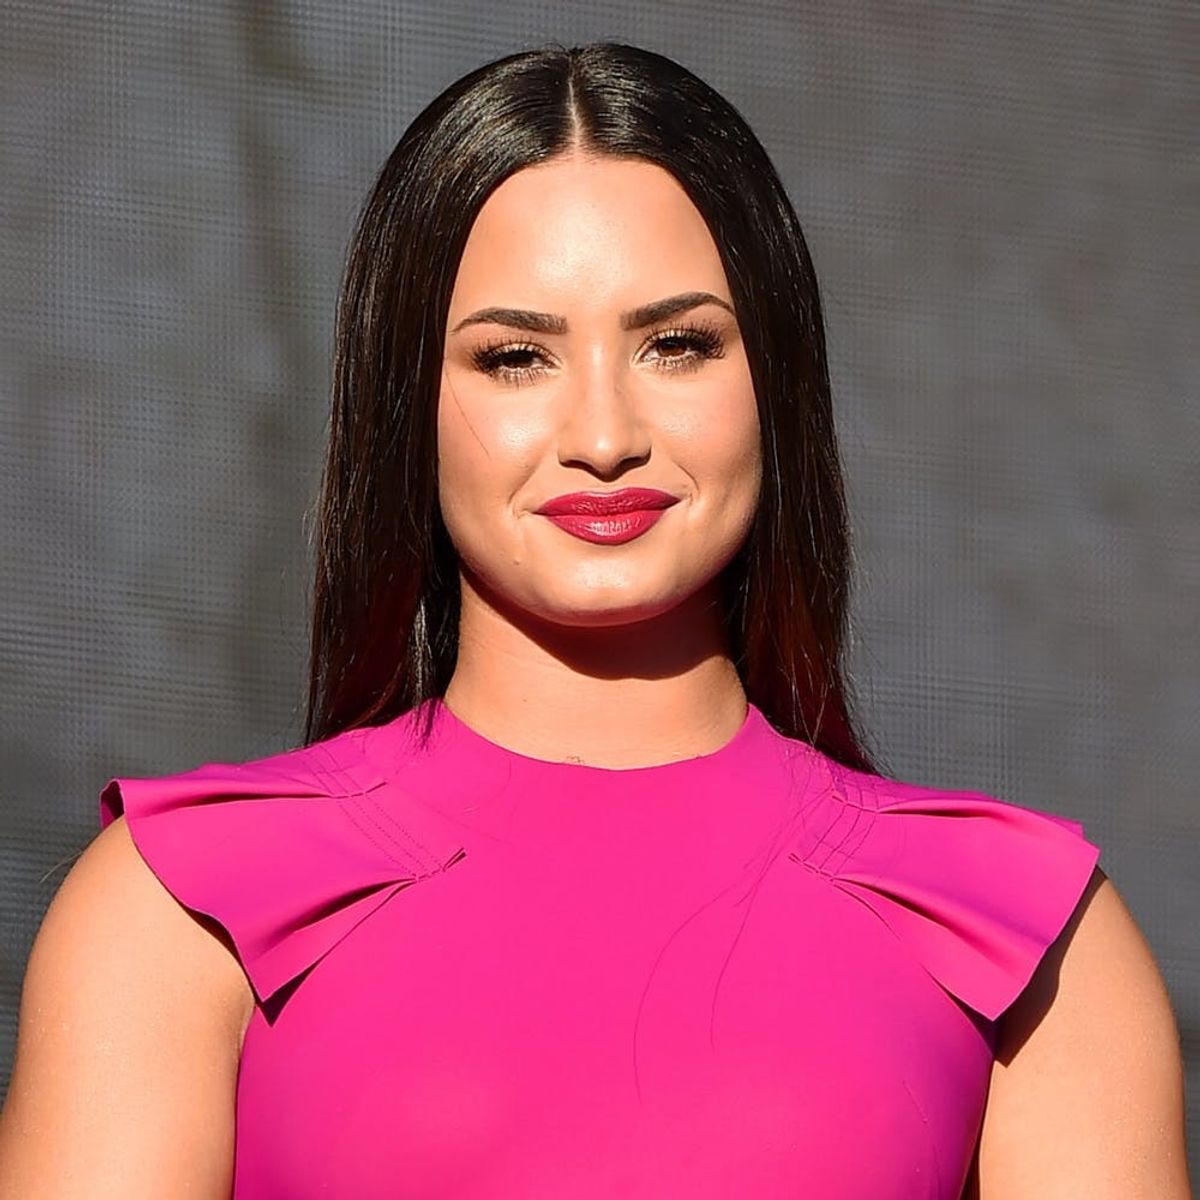 5 Revelations from Demi Lovato’s “Simply Complicated” Documentary